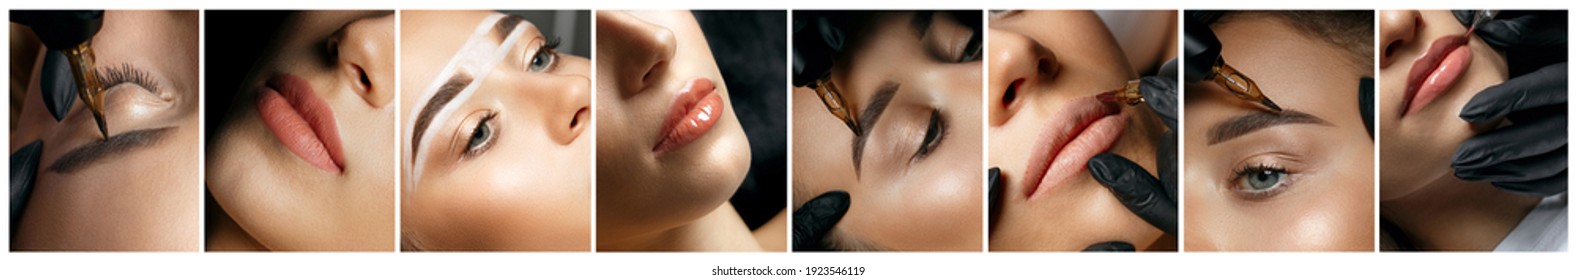 Permanent makeup collage: closeup photos of eyes and eyebrows. Specialist applying permanent pigment